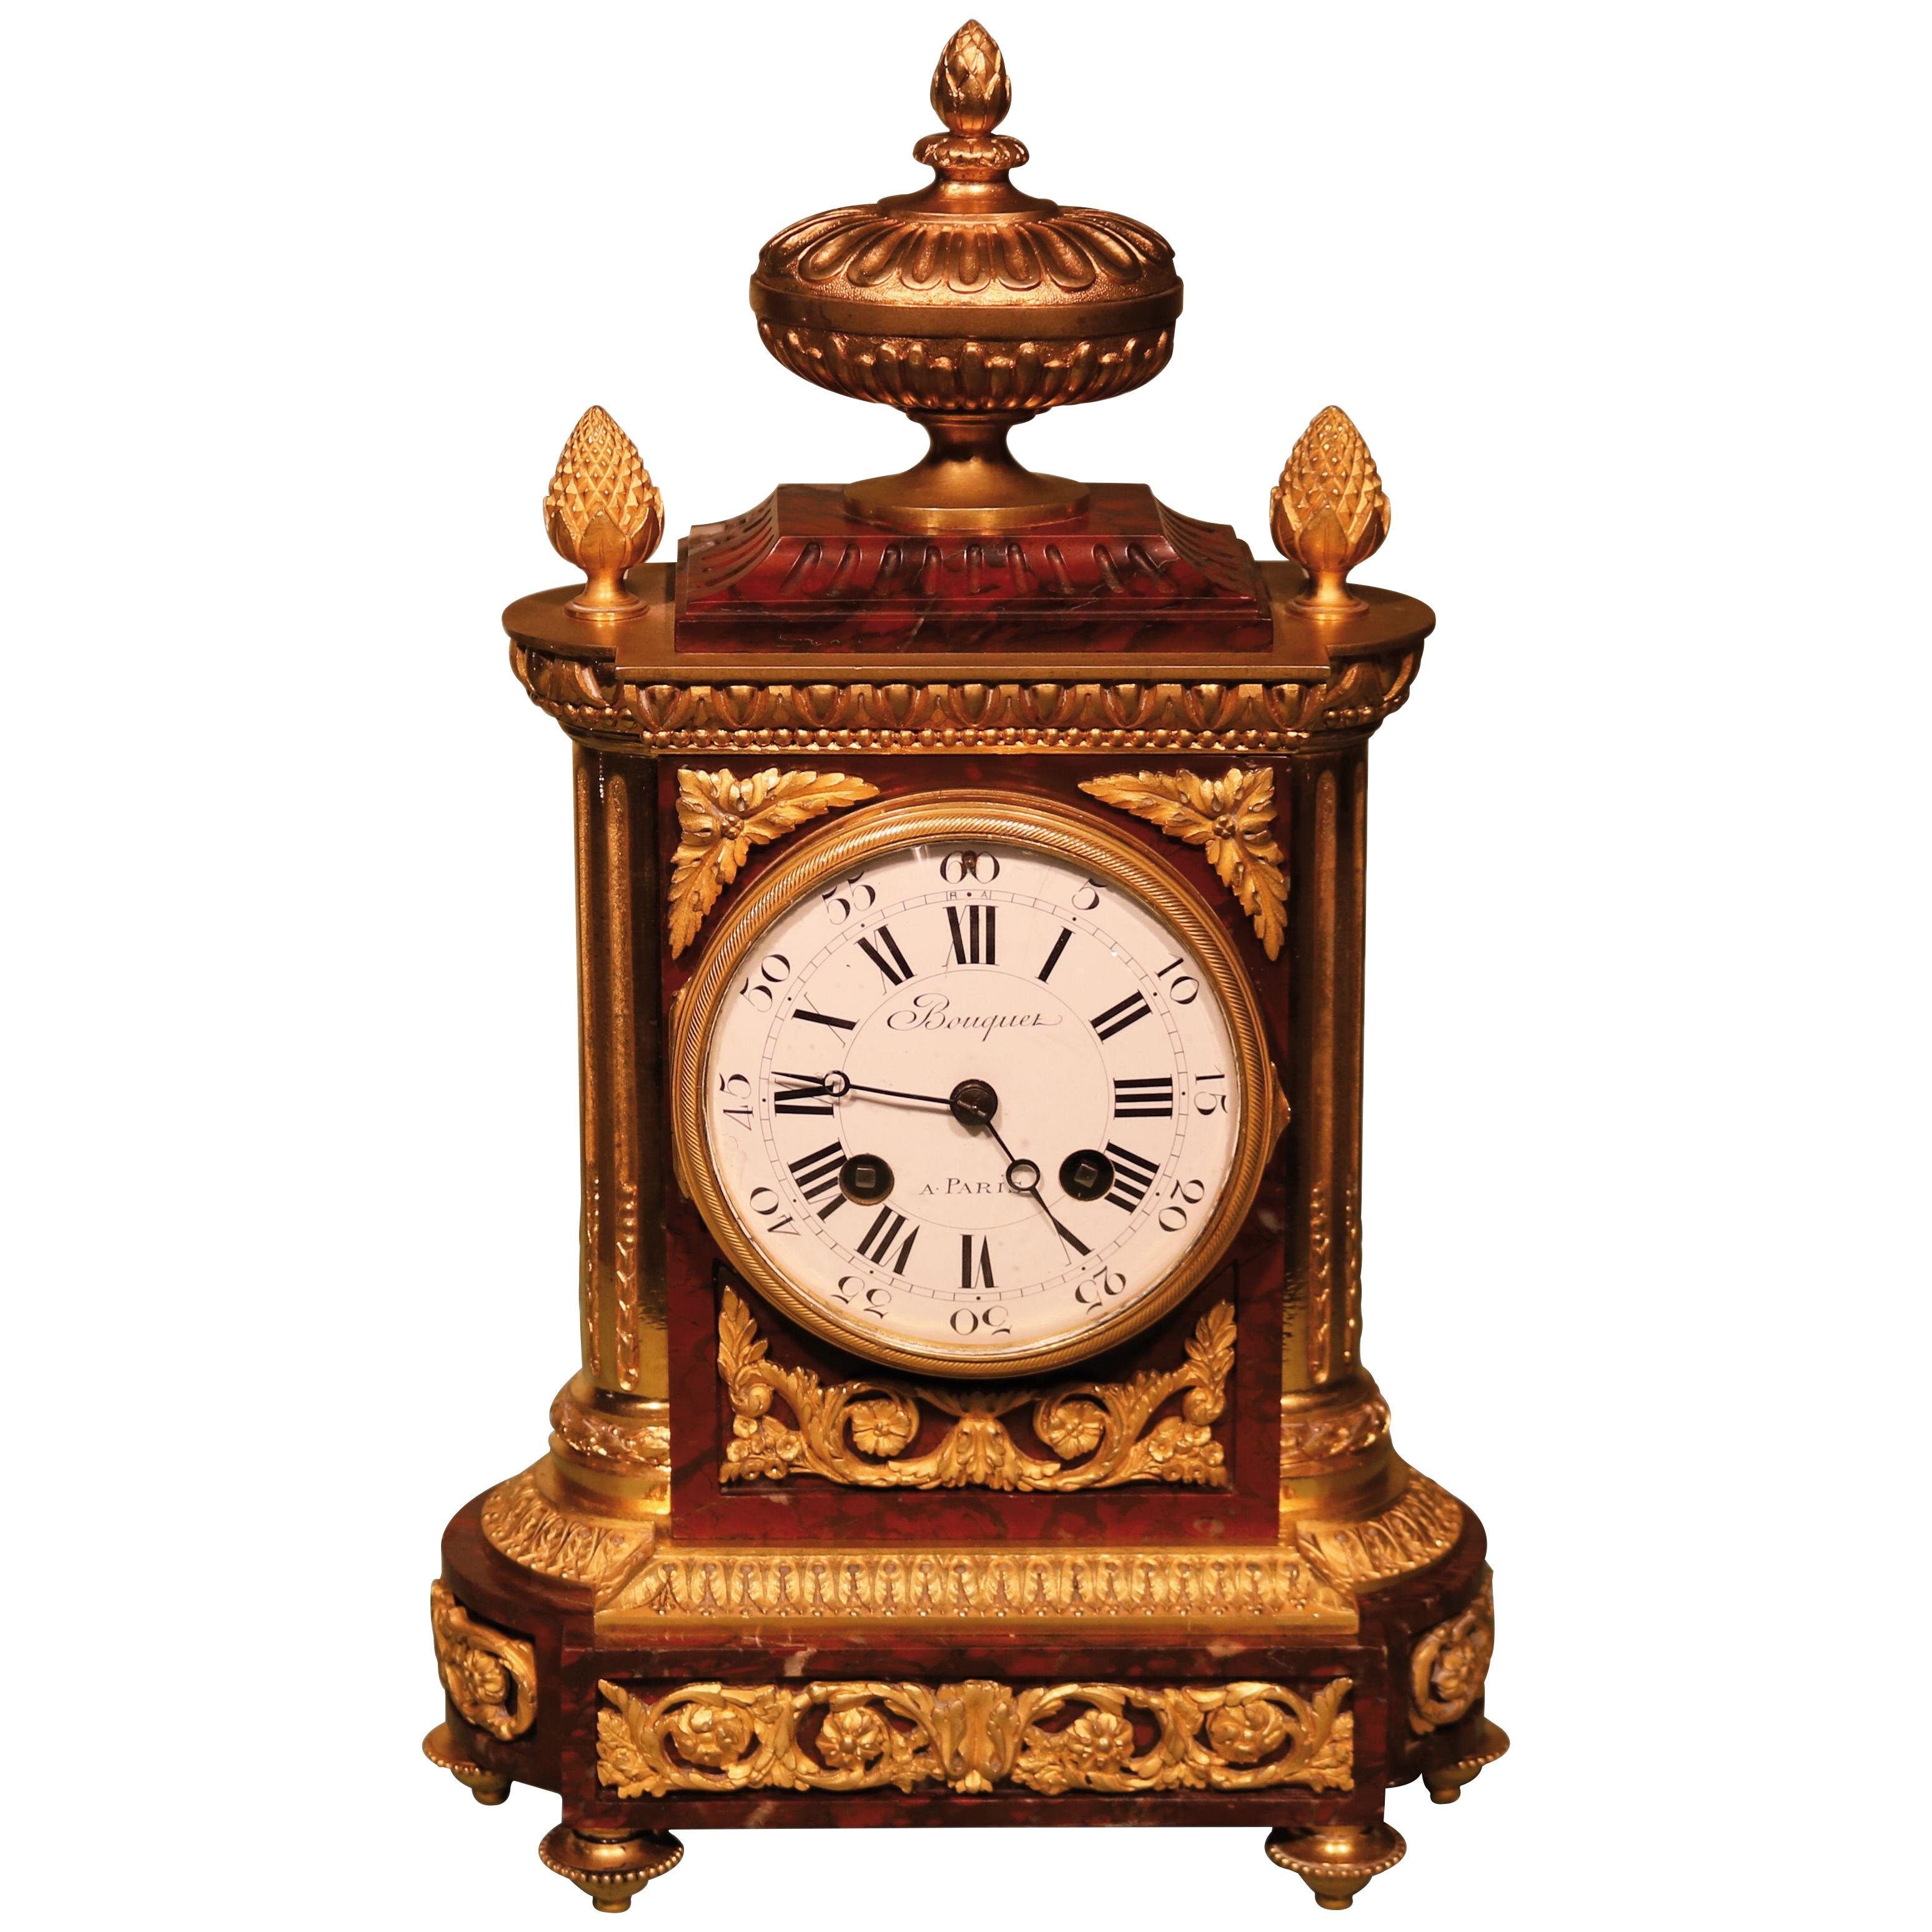 A mid 19th century Louis XVI style marble and bronze clock by Bouquet of Paris